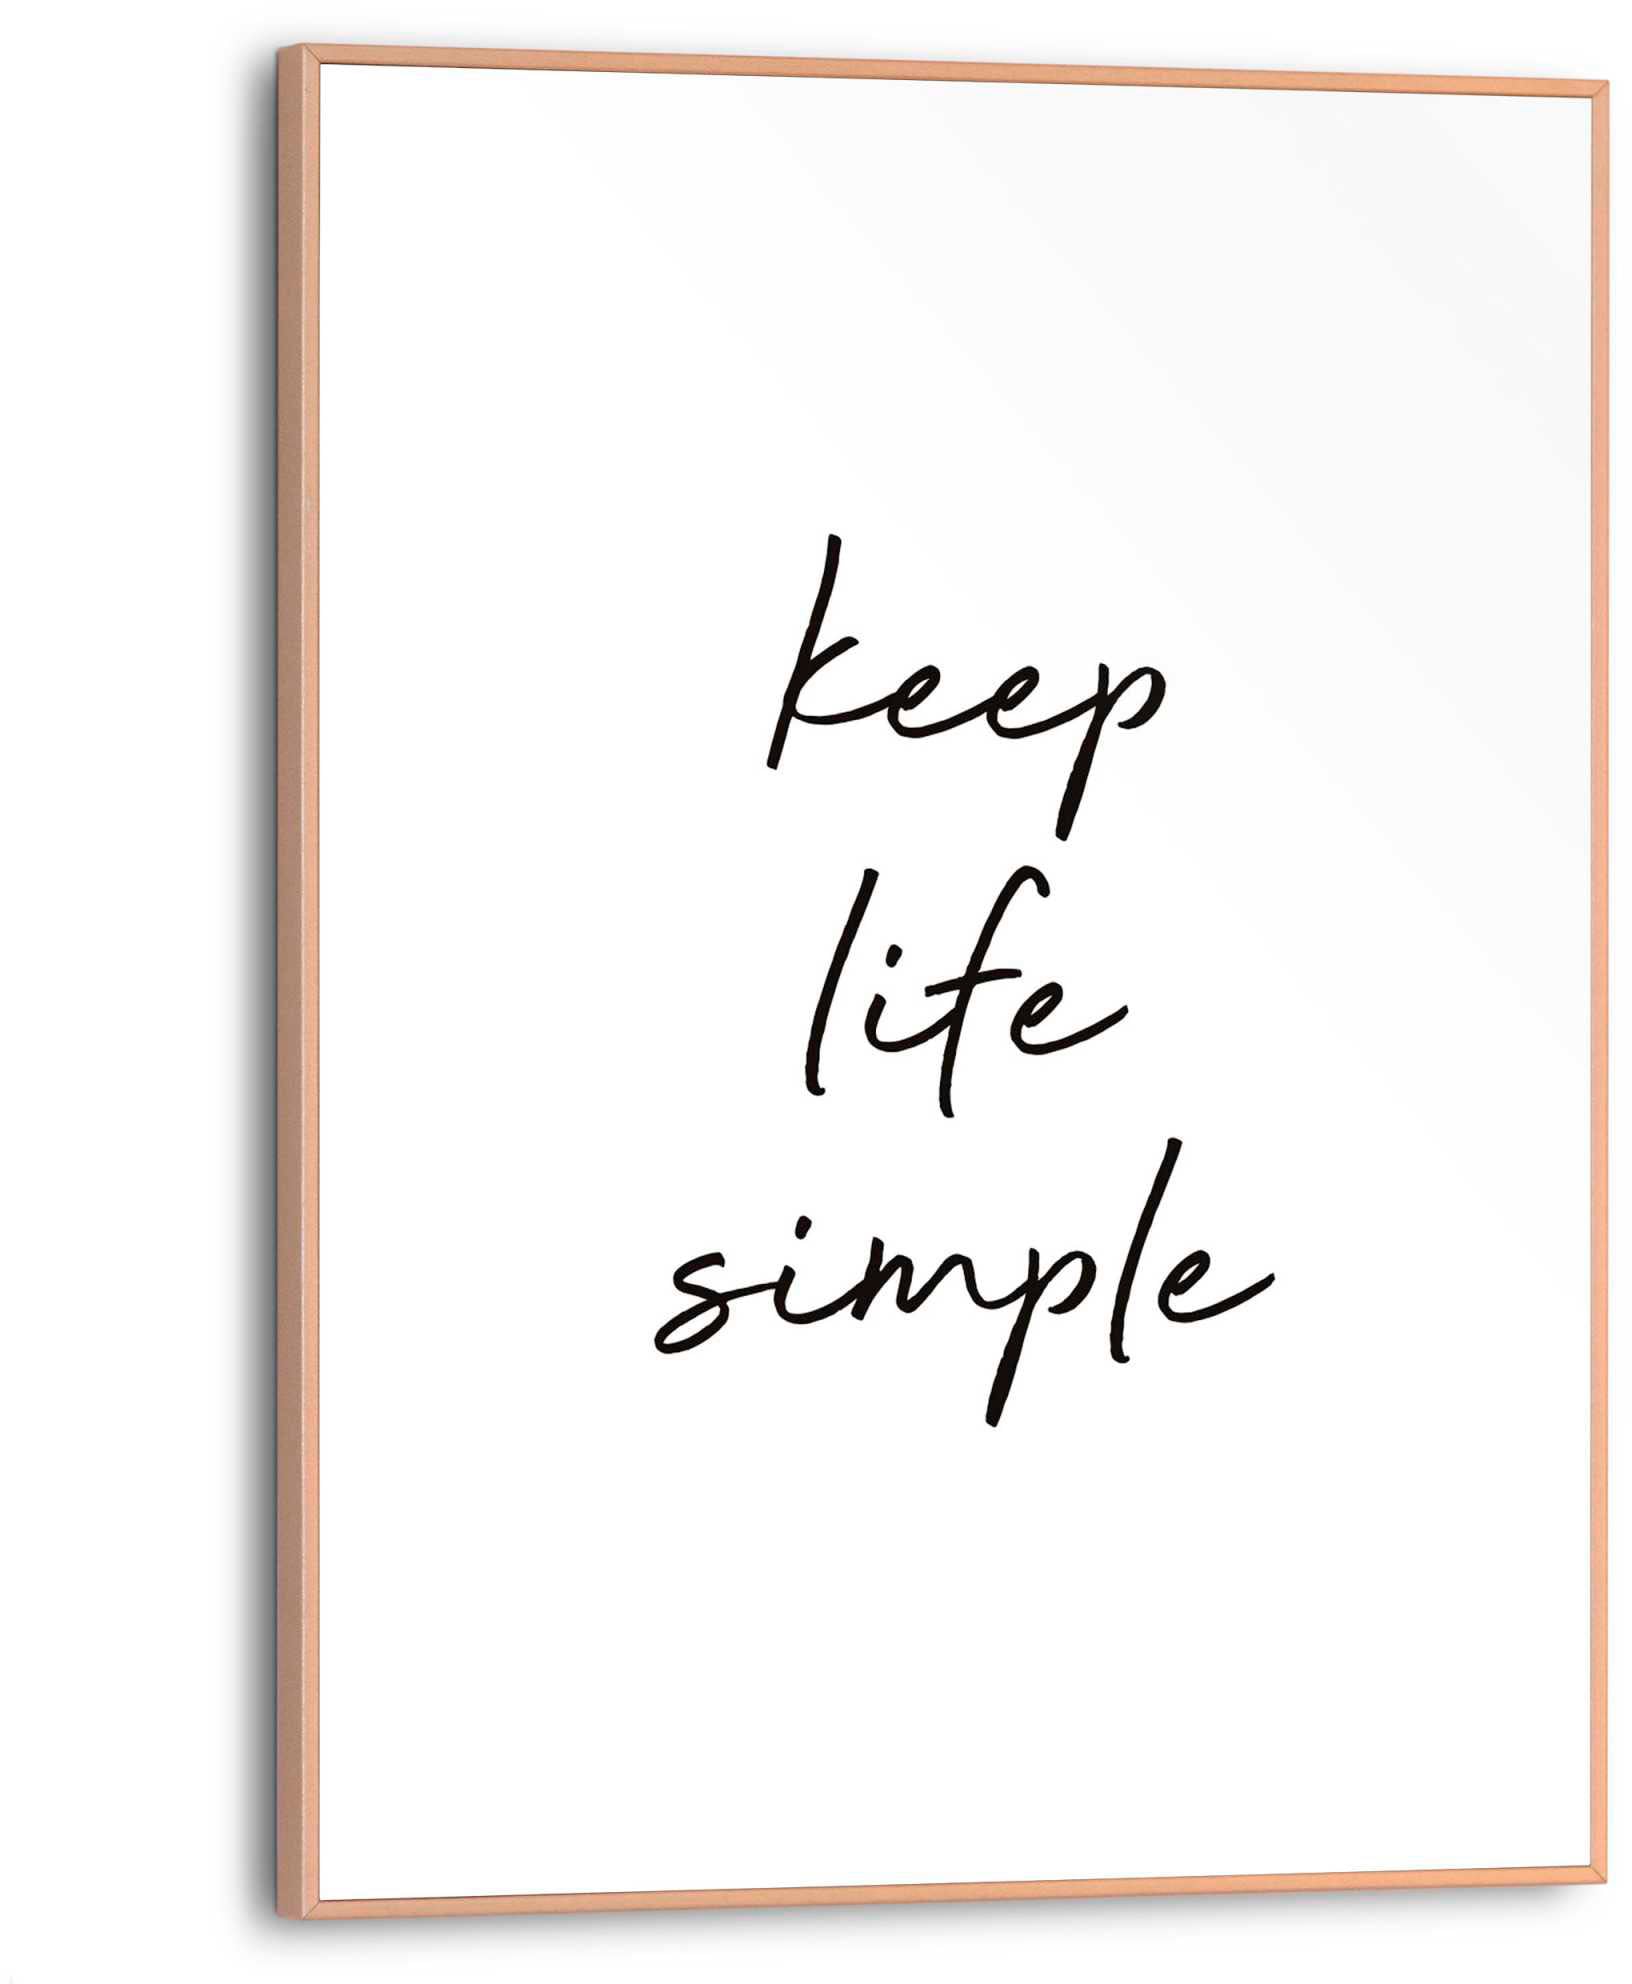 Reinders! kaufen simple« life »Keep bei OTTO Poster